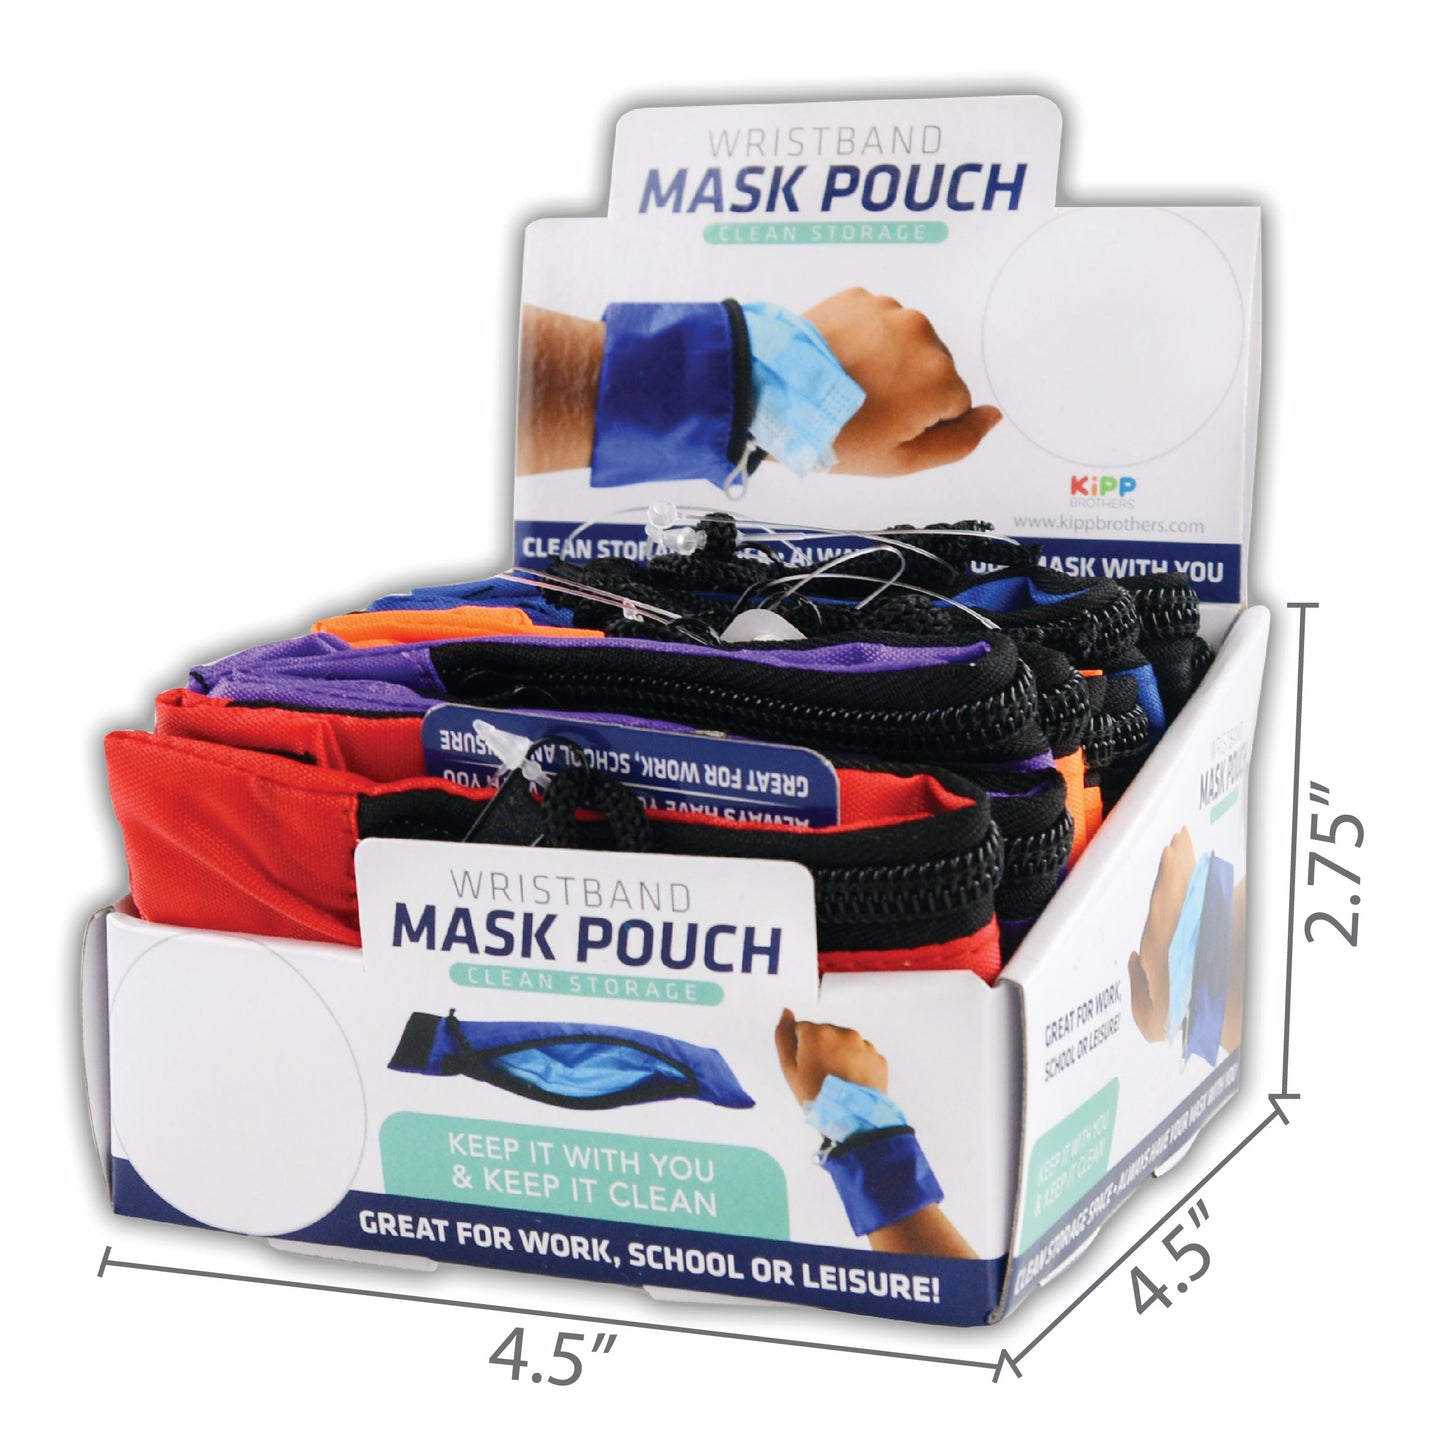 ITEM NUMBER 021964 MASK POUCH WRISTBAND 12 PIECES PER DISPLAY